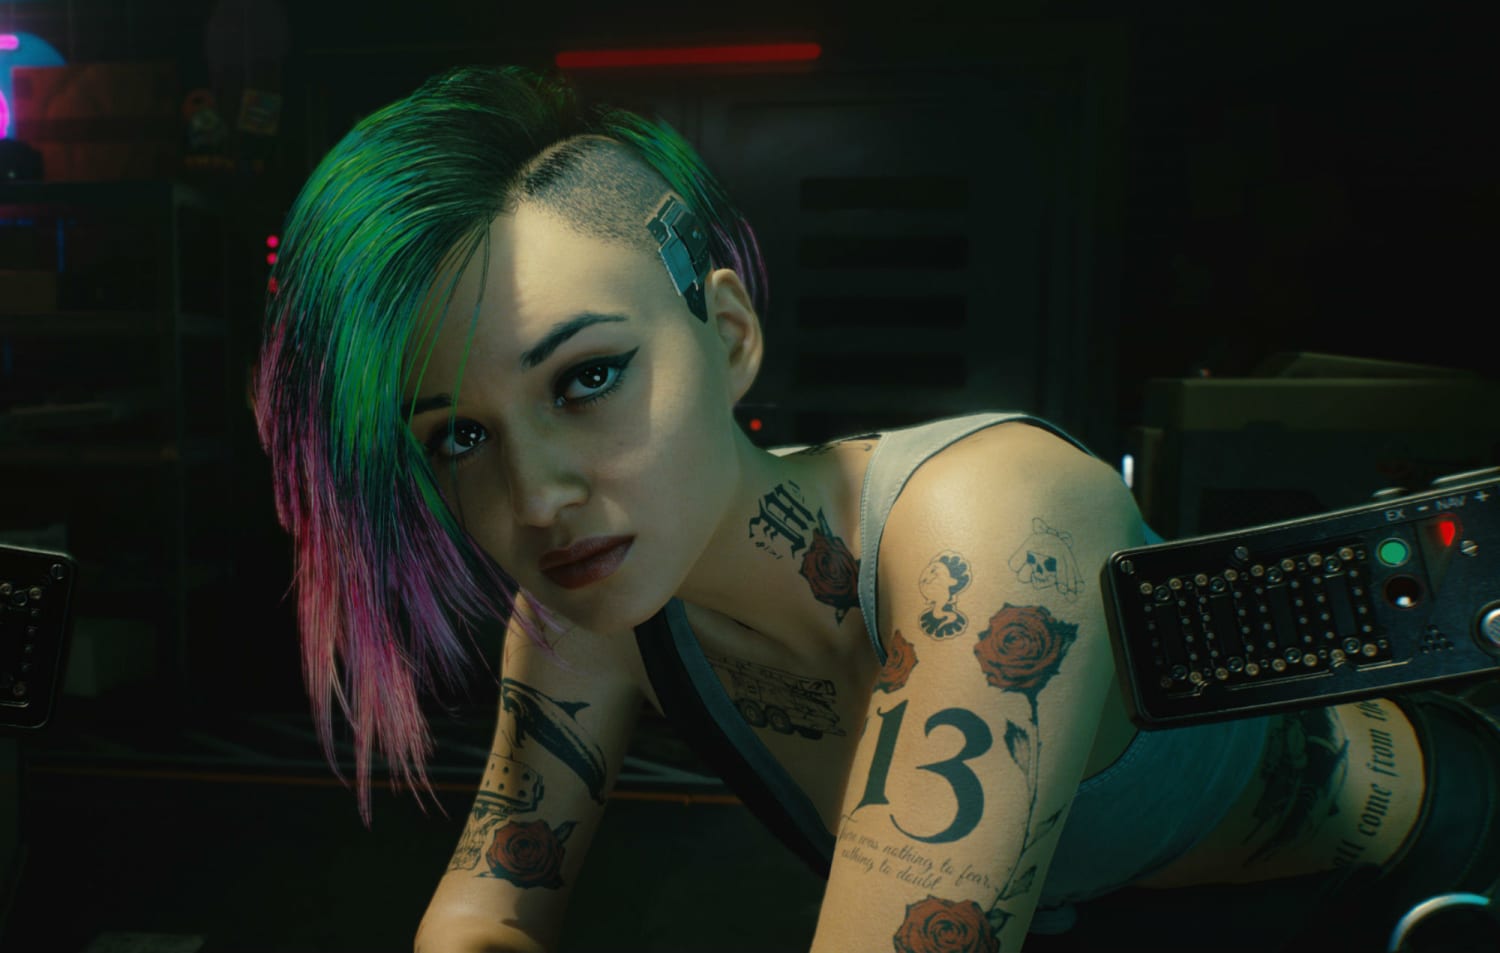 Physical copies of ‘Cyberpunk 2077’ have been leaked